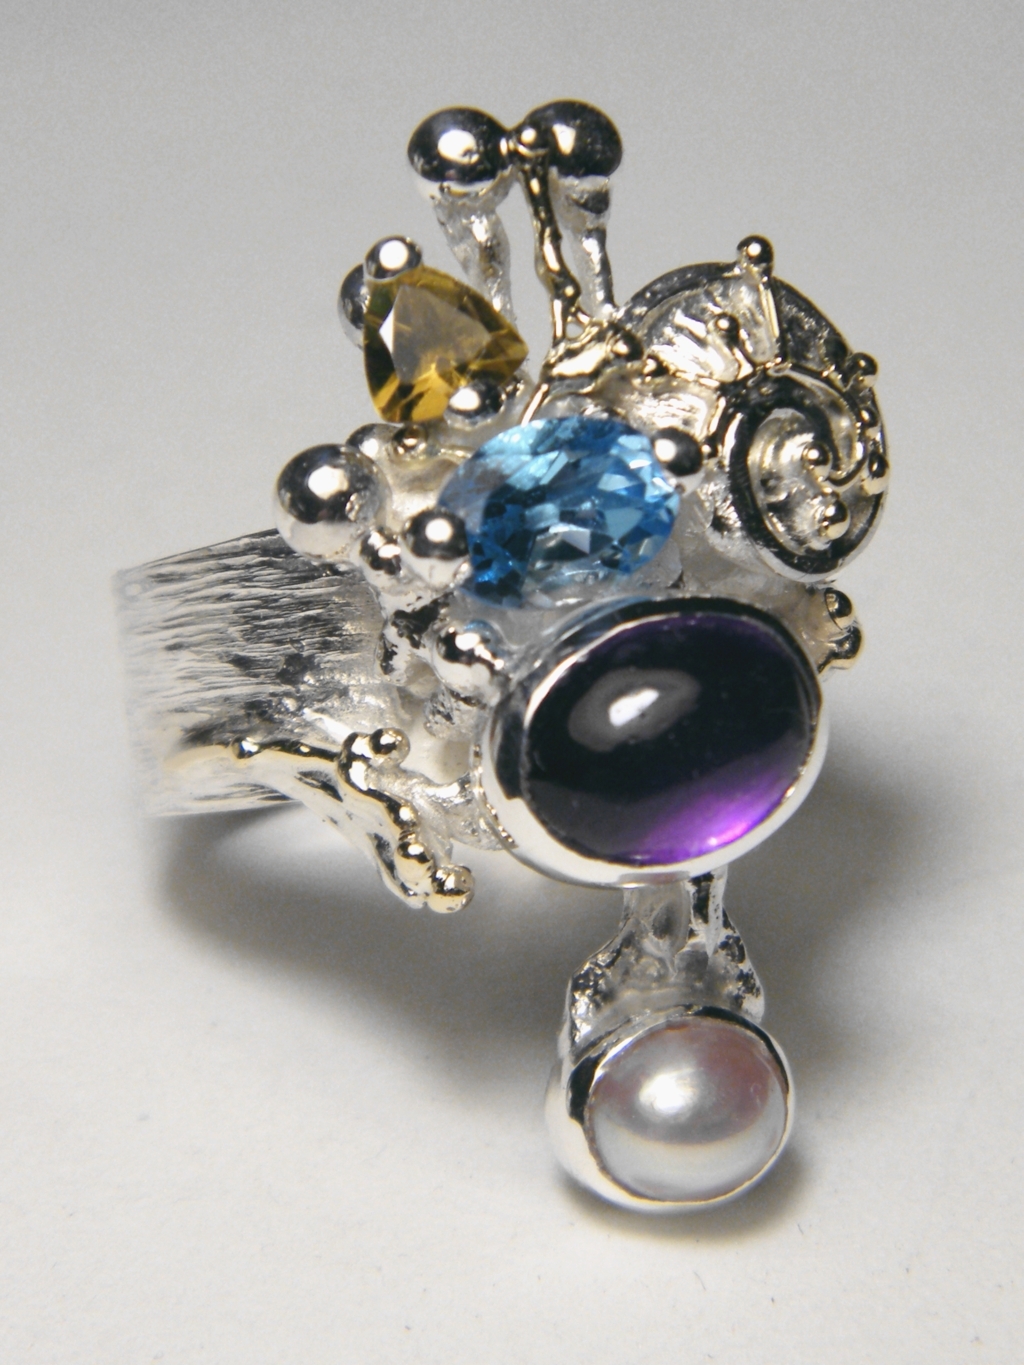 mixed metal jewelry made from silver and gold, gregory pyra piro handcrafted riing 4020, handcrafted rings for women with amethyst and blue topaz, handcrafted rings for women with blue topaz and peridot, handcrafted rings for women with amethyst and blue topaz, handcrafted jewellery with facet cut gemstones and pearls, handcrafted jewellery and rings shown in art and craft galleries